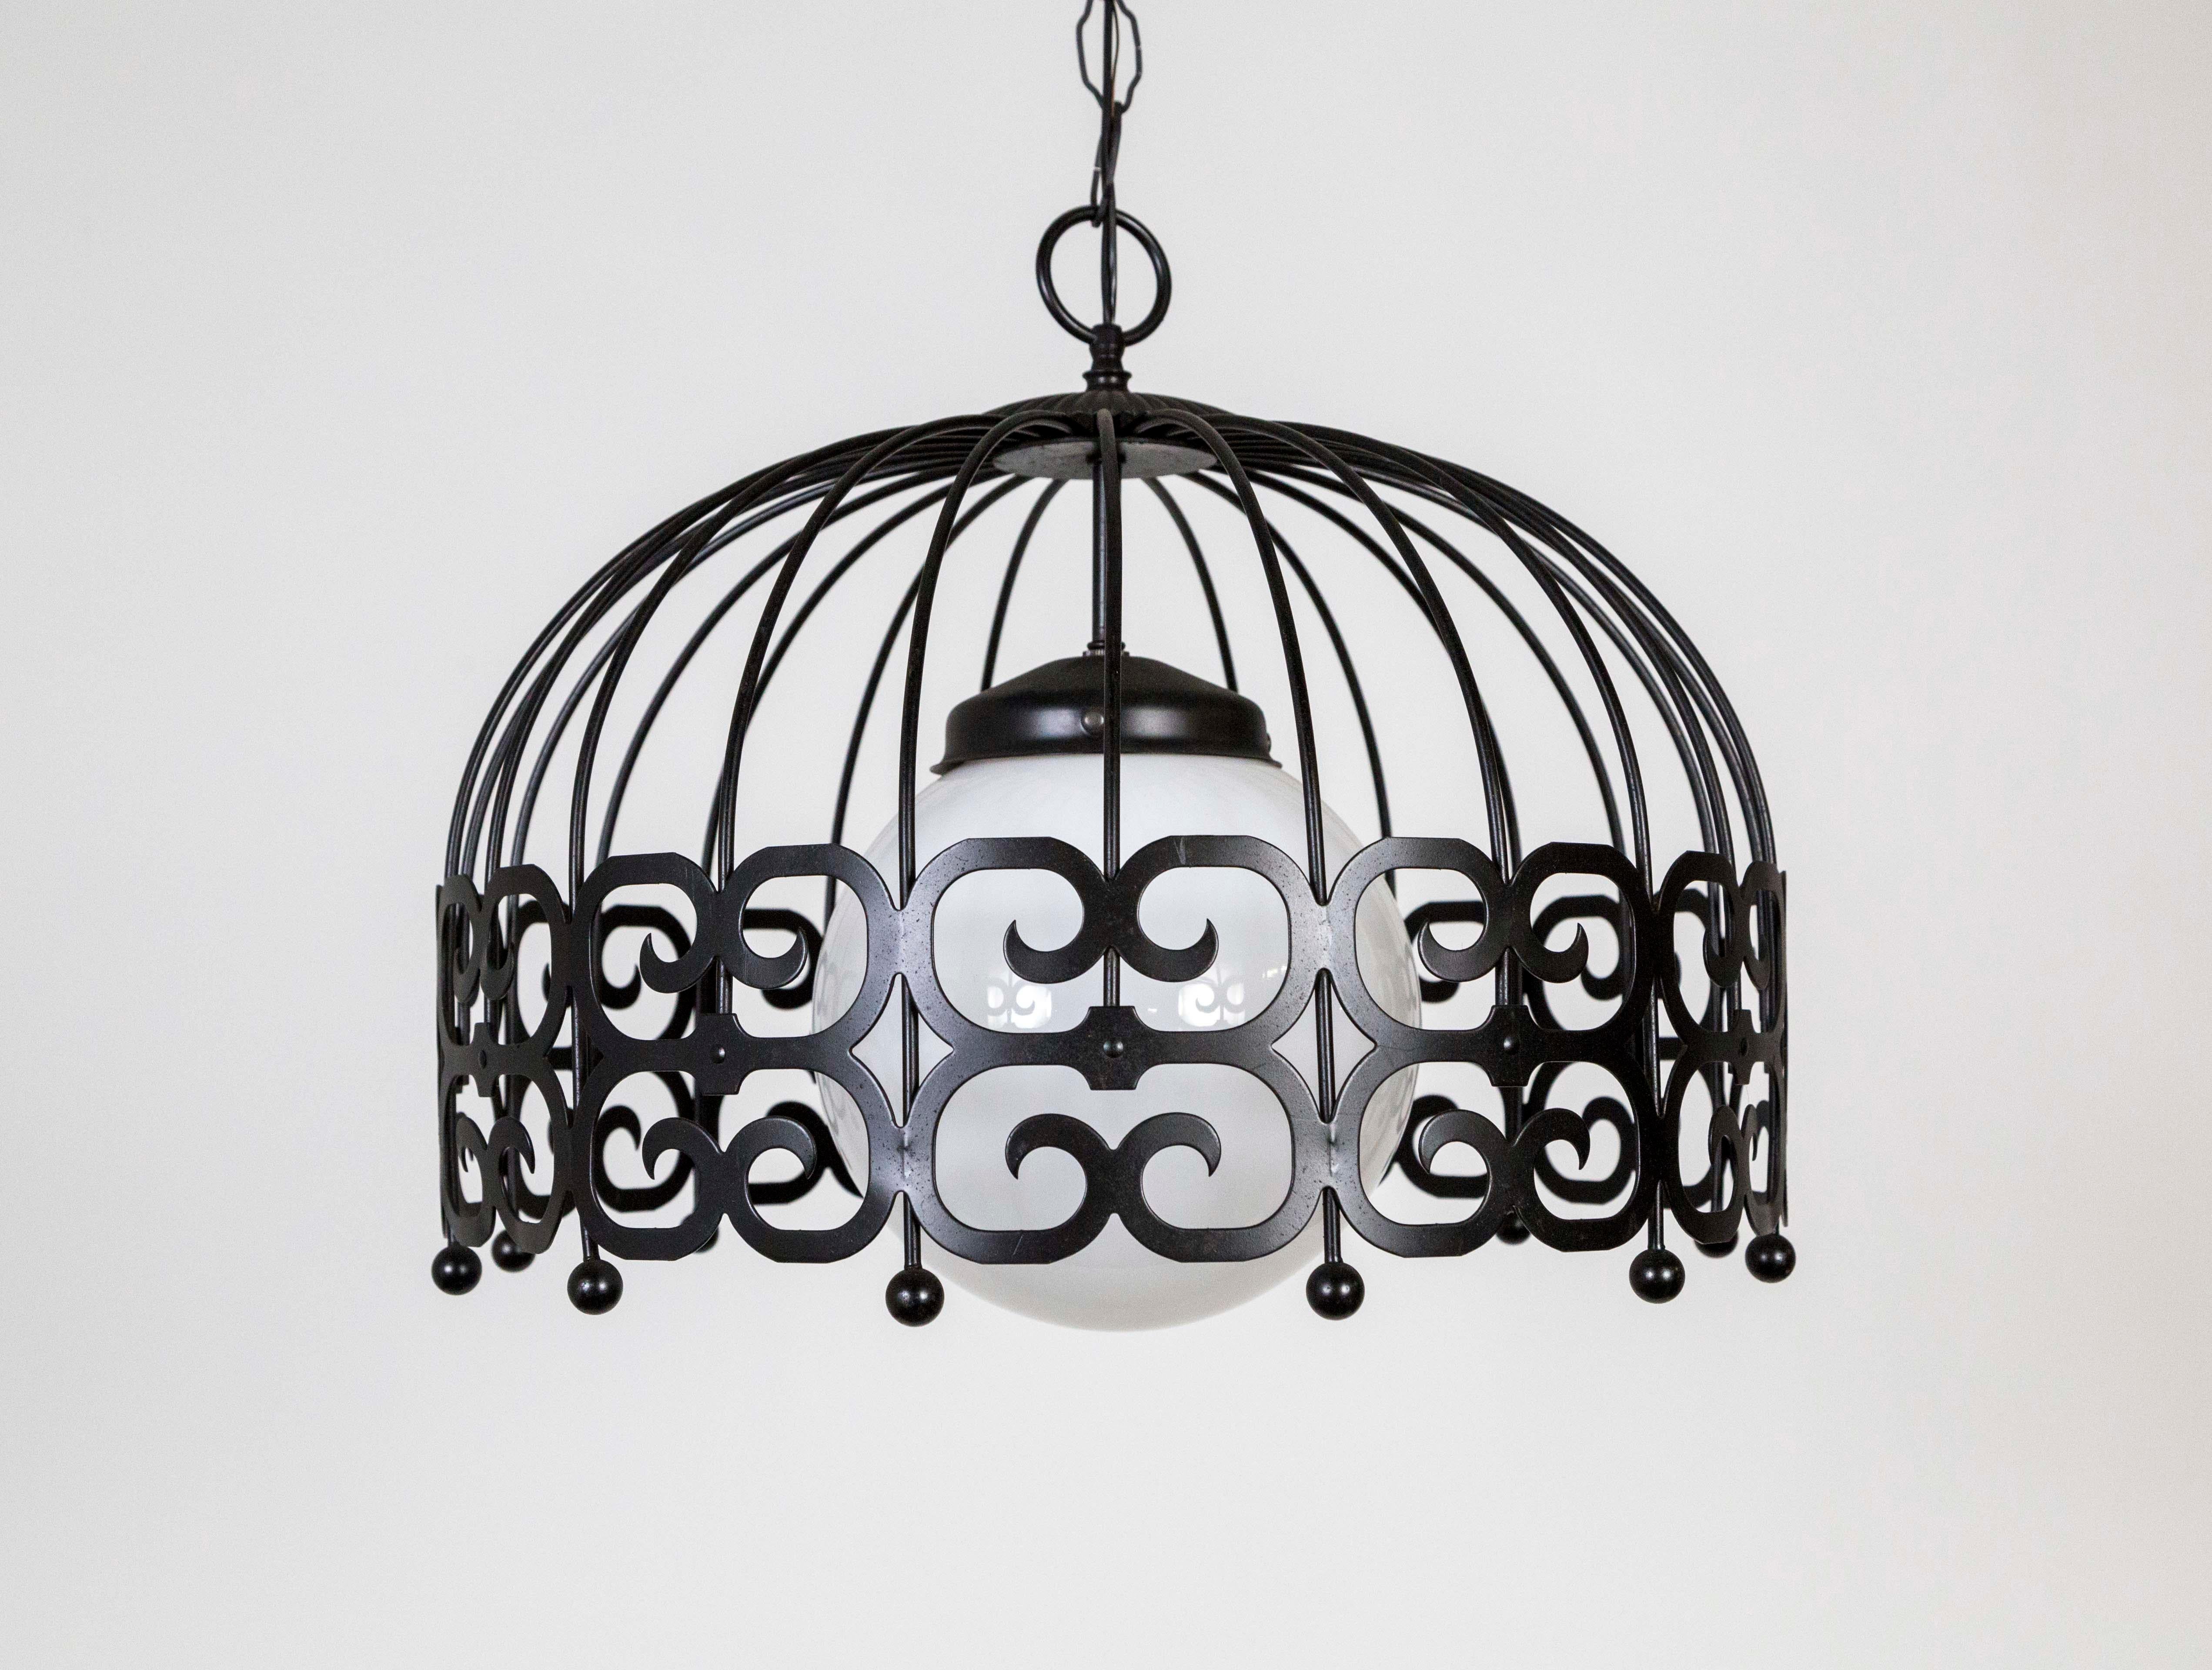 A pendant light consisting of a dome shape wire armature, with iconic Arthur Umanoff scrolls and ball details, surrounding a suspended, white glass ball shade. Black satin finished metal, newly wired with a long chain and matching canopy. Measures: